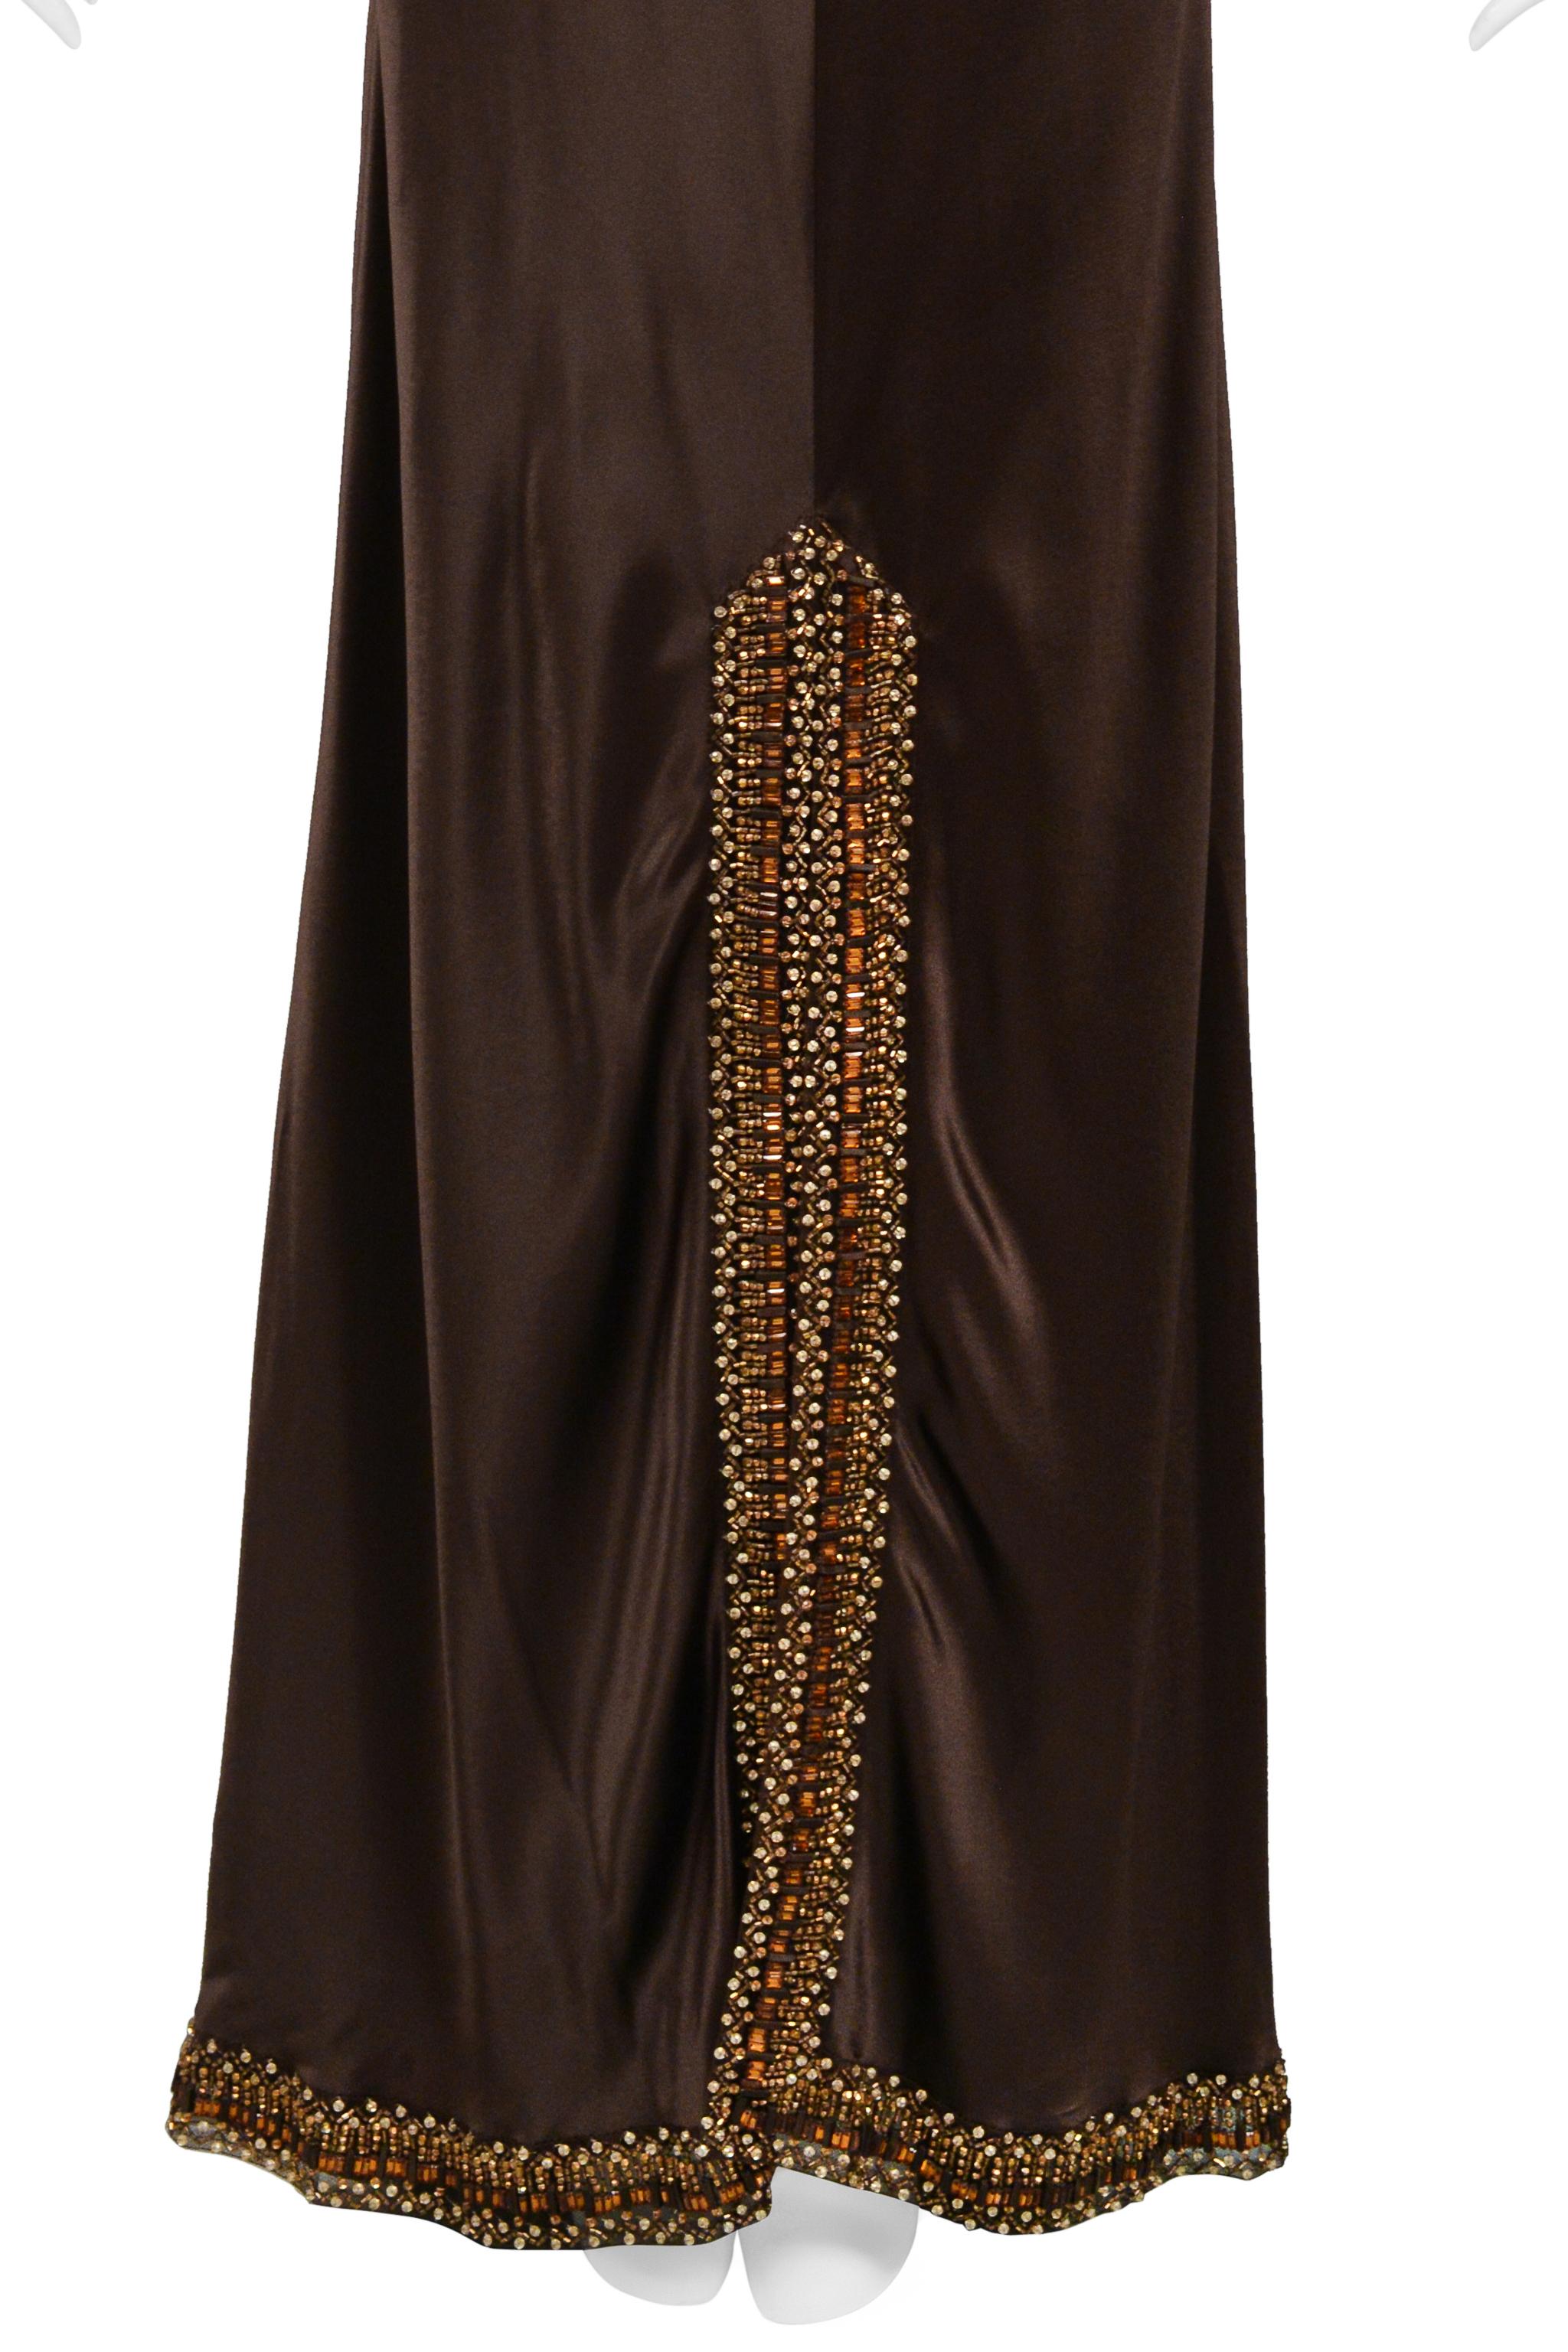 Valentino Brown Silk Evening Gown With Jacket AW 2006-07 For Sale 7